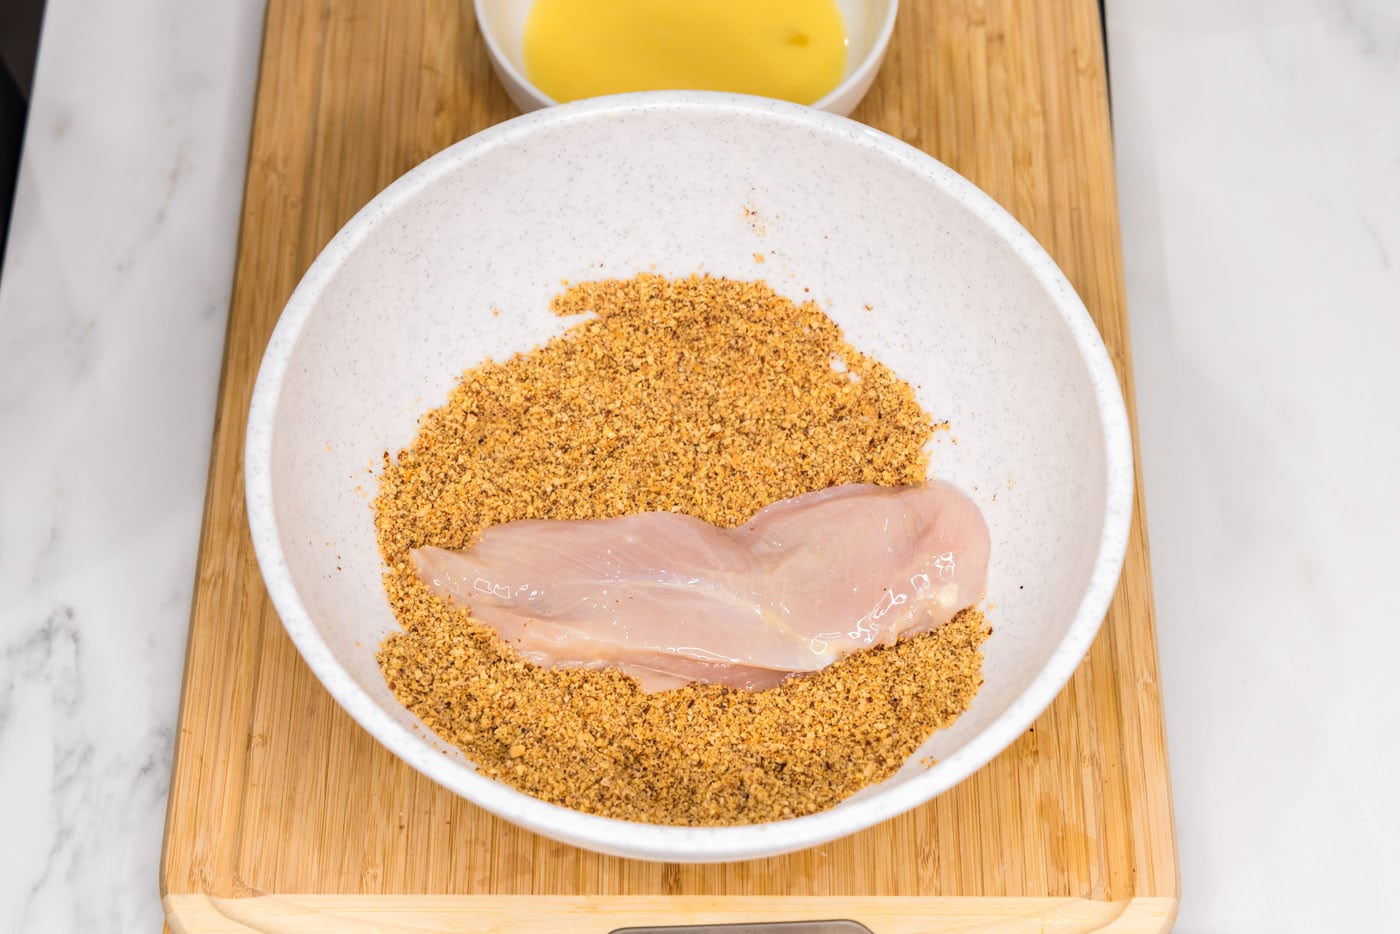 dredging chicken breast in crushed almonds